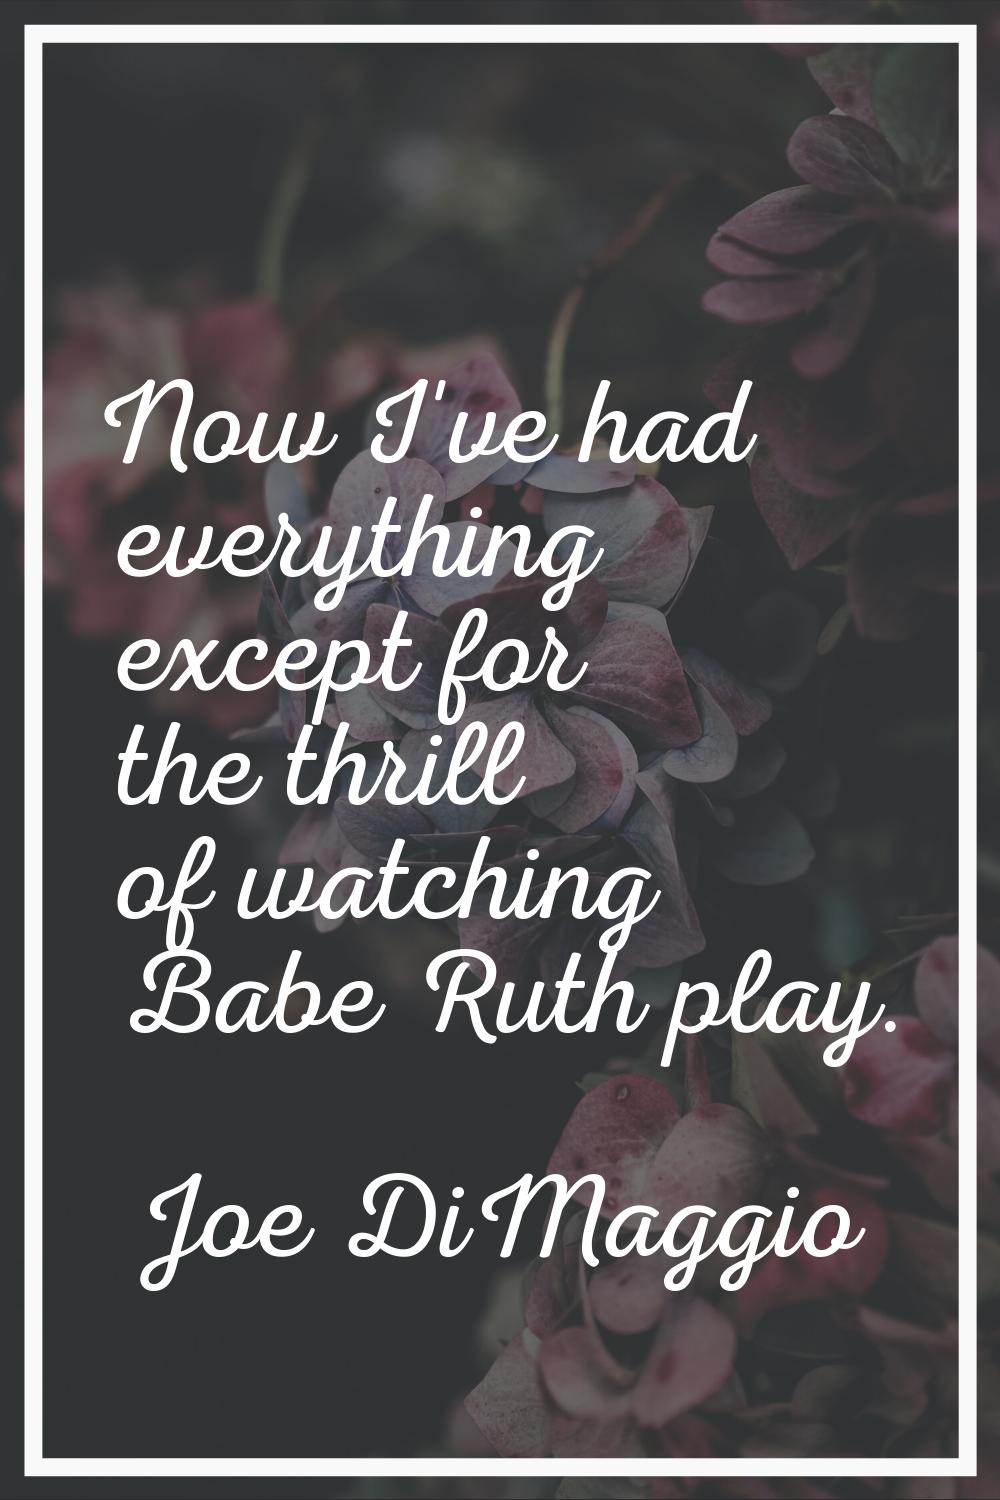 Now I've had everything except for the thrill of watching Babe Ruth play.